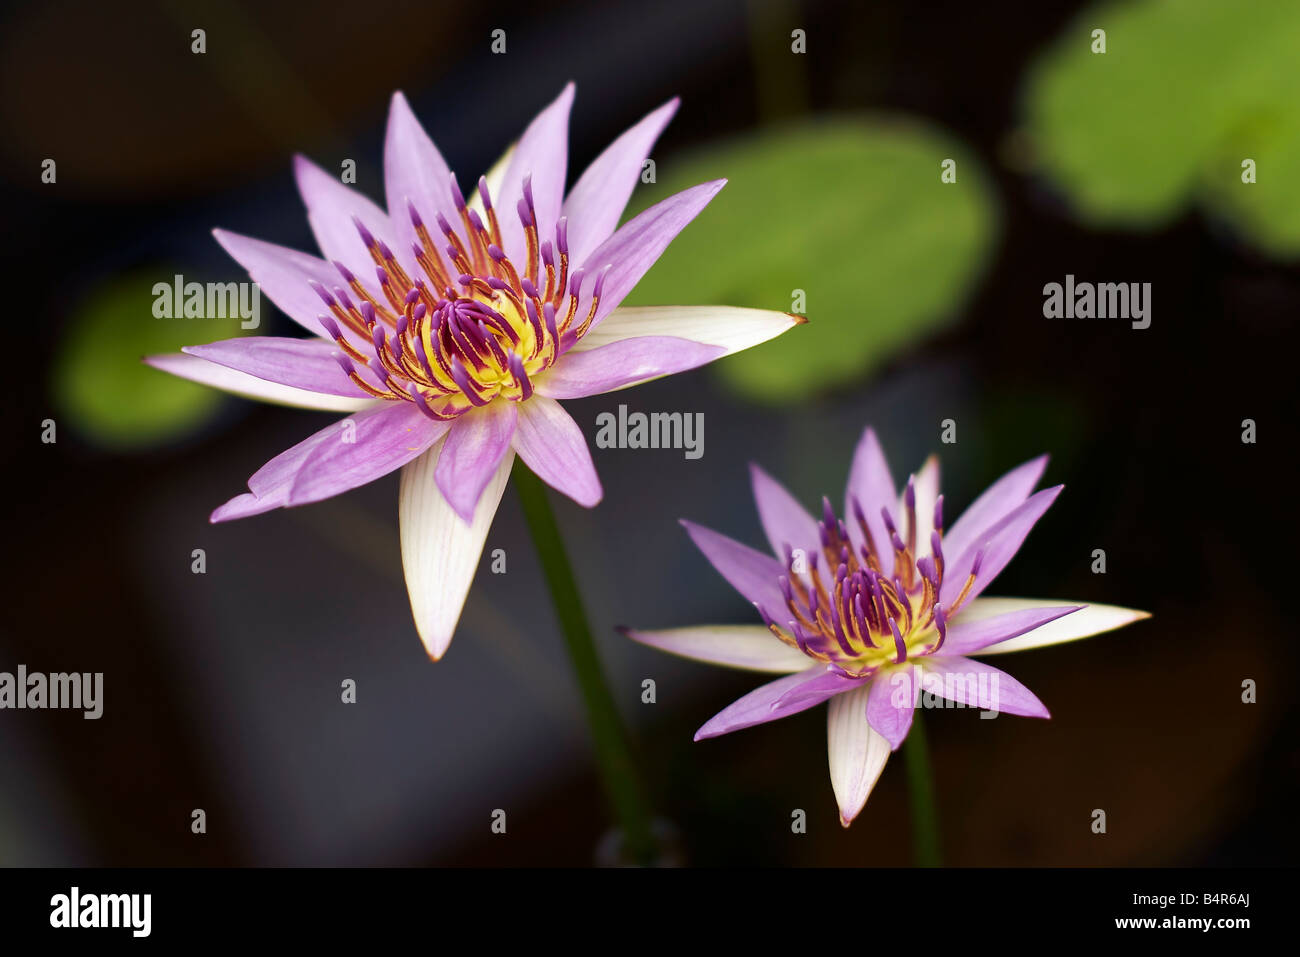 Mauve colored water lilies in an aquatic garden nursery Stock Photo